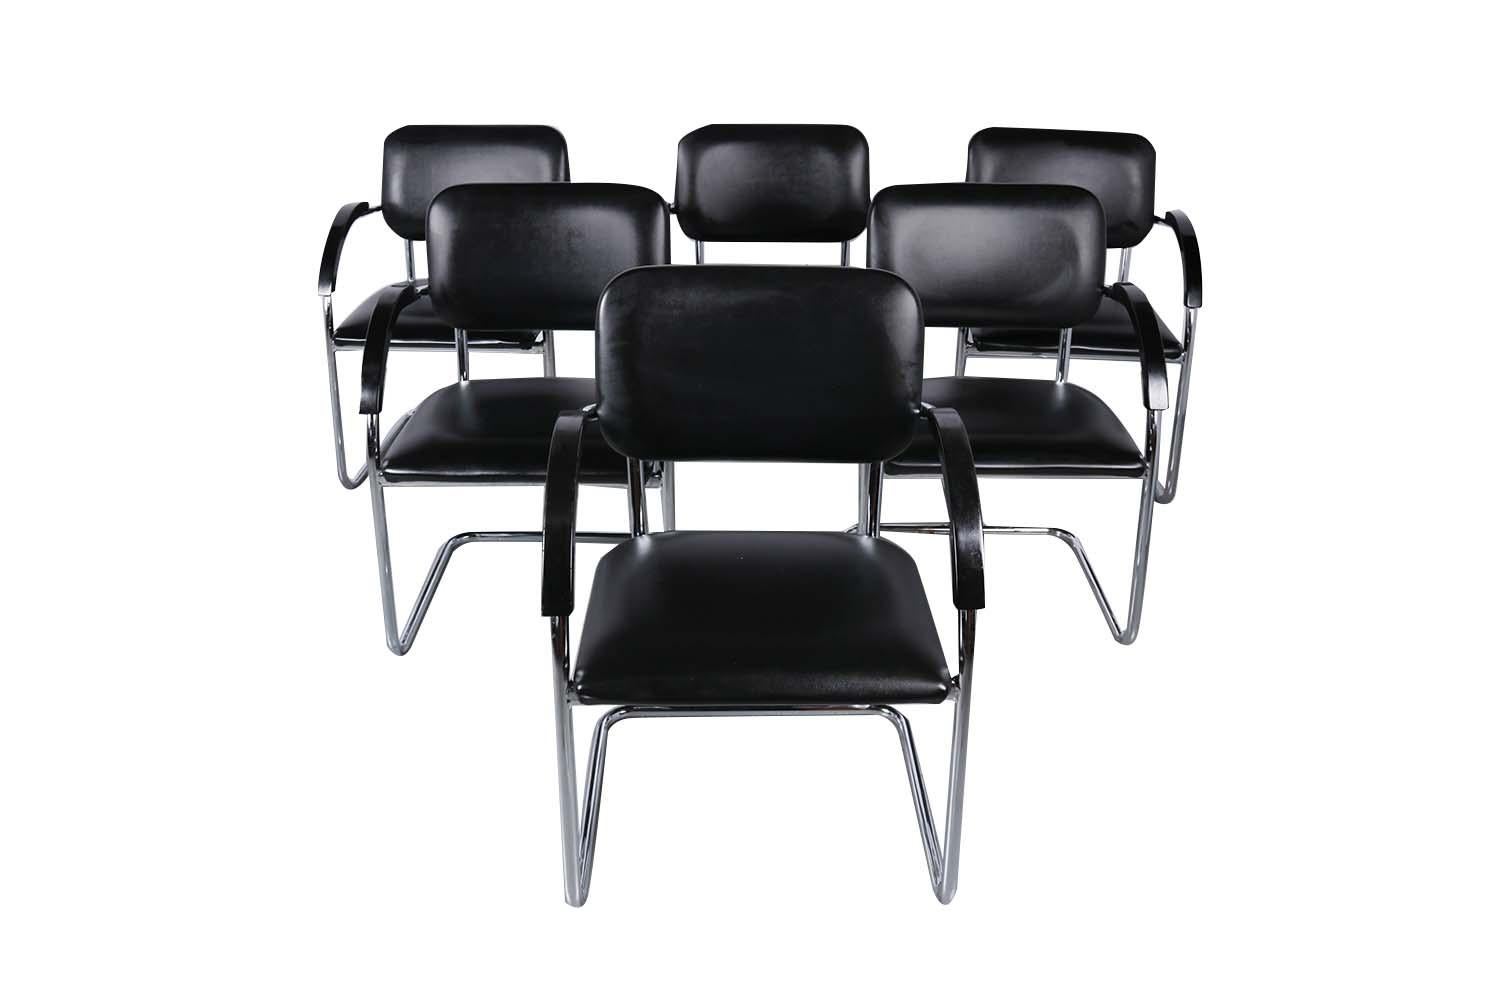 A stunning set of six vintage, Cantilevered chrome frame armchairs designed by Hank Loewenstein. In the manner of Marcel Brewer Cesca chairs. A beautiful modernist cantilever design each features chromed metal frames upholstered in original black